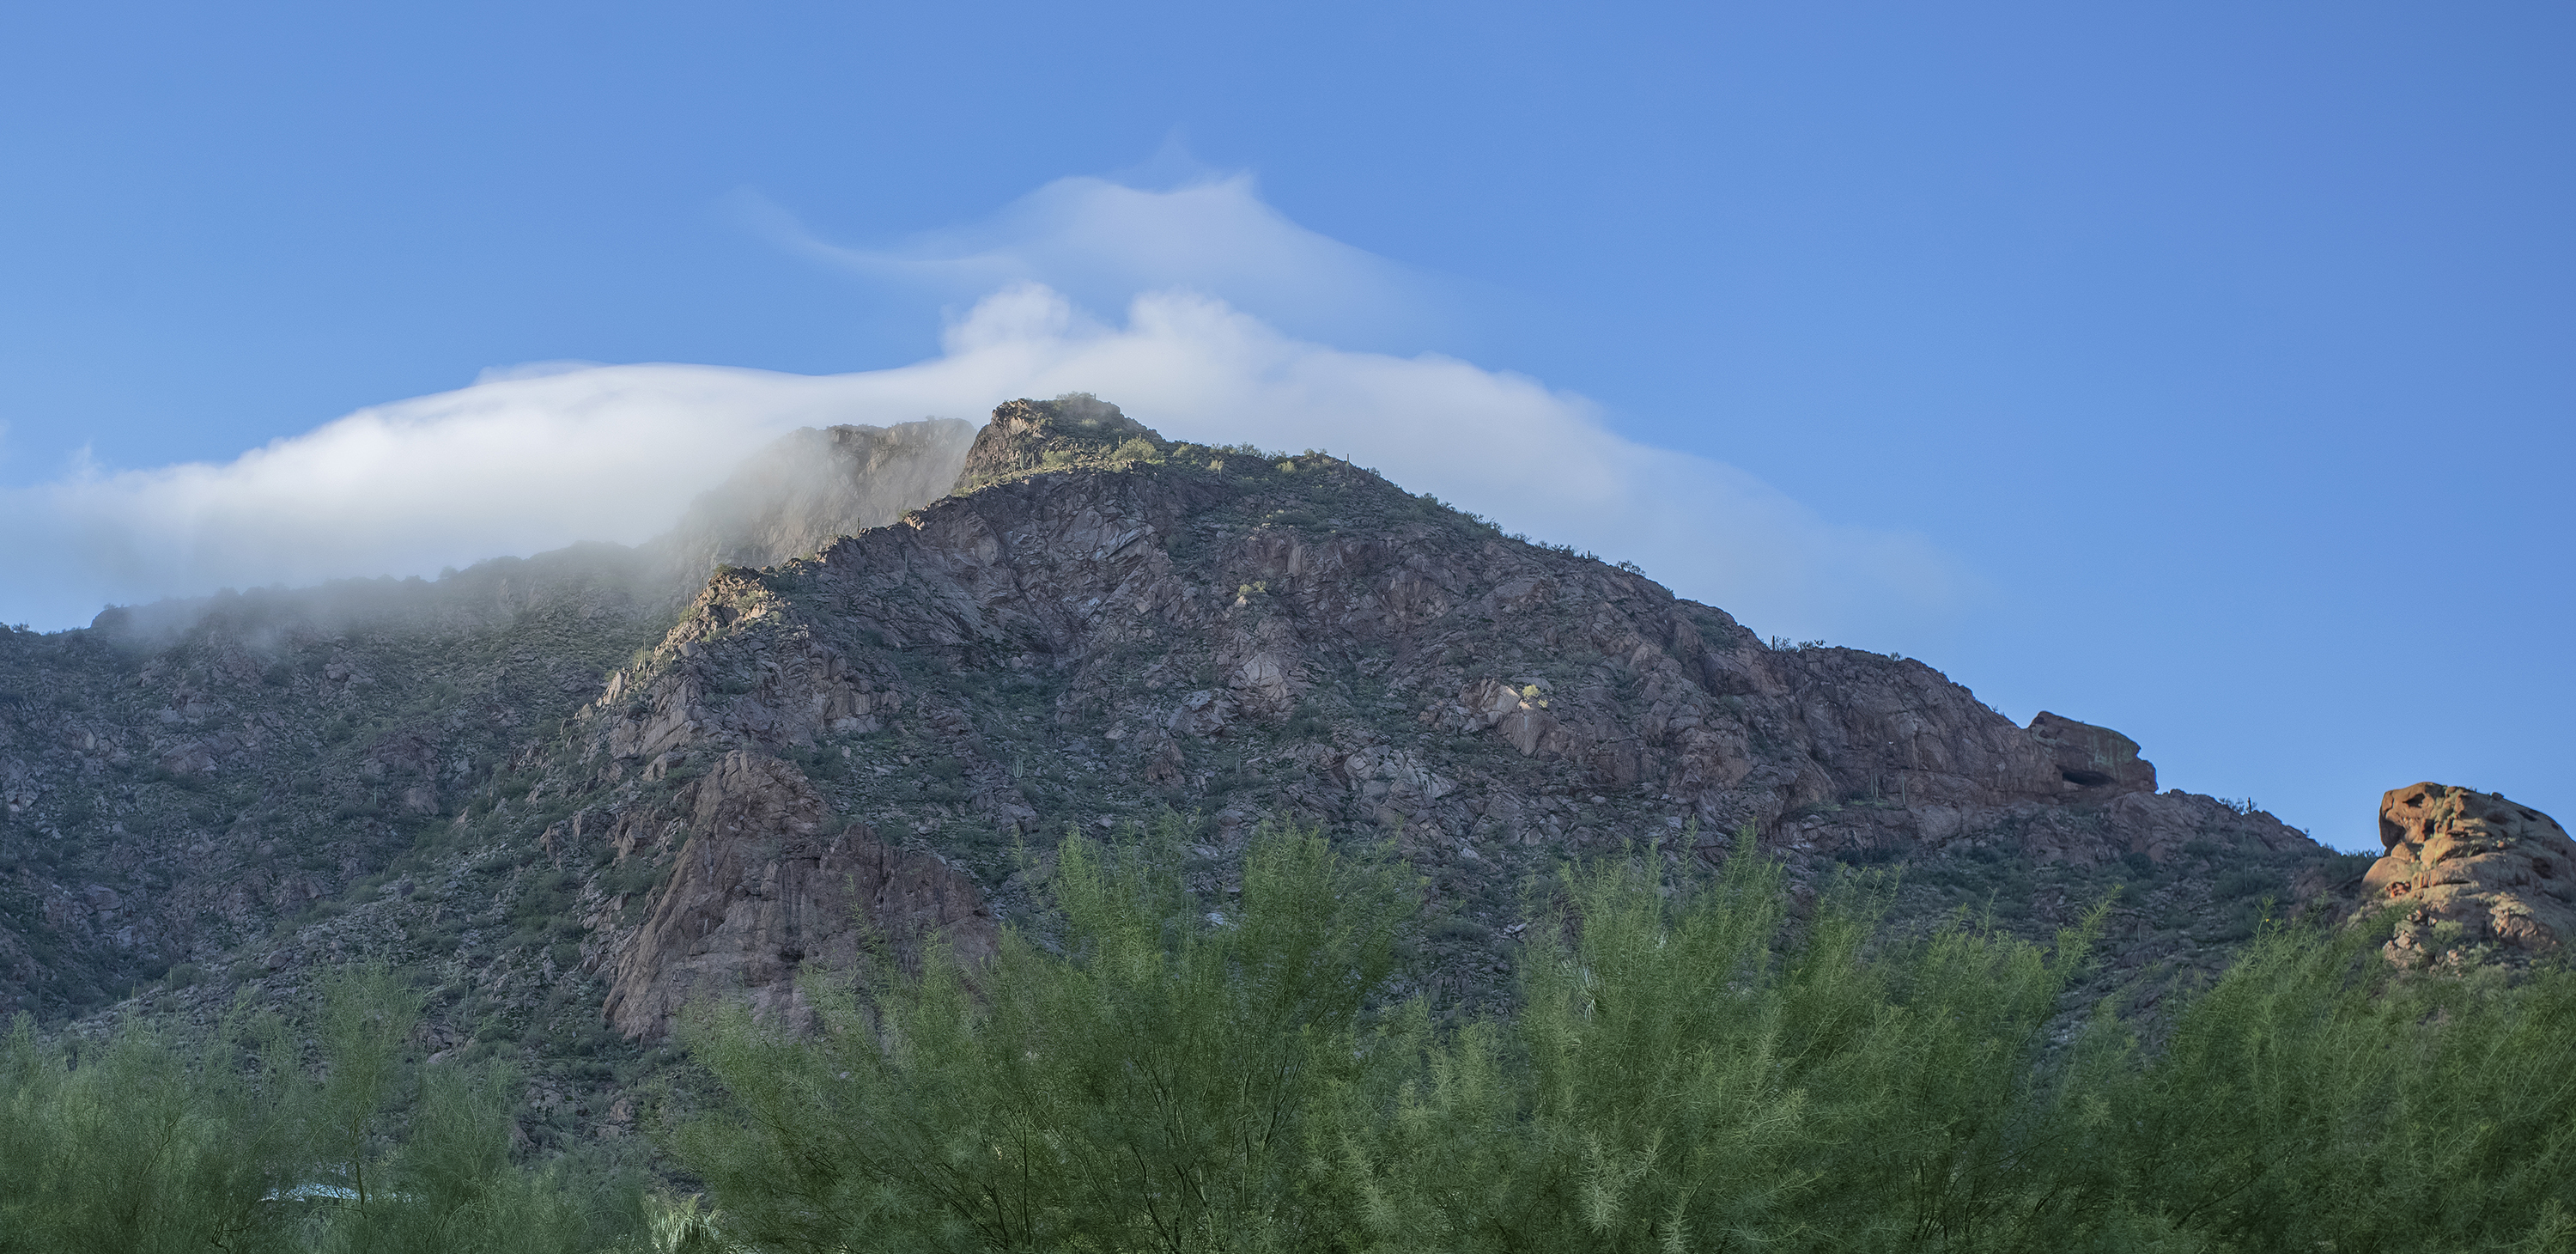 Camelback Mountain in the clouds